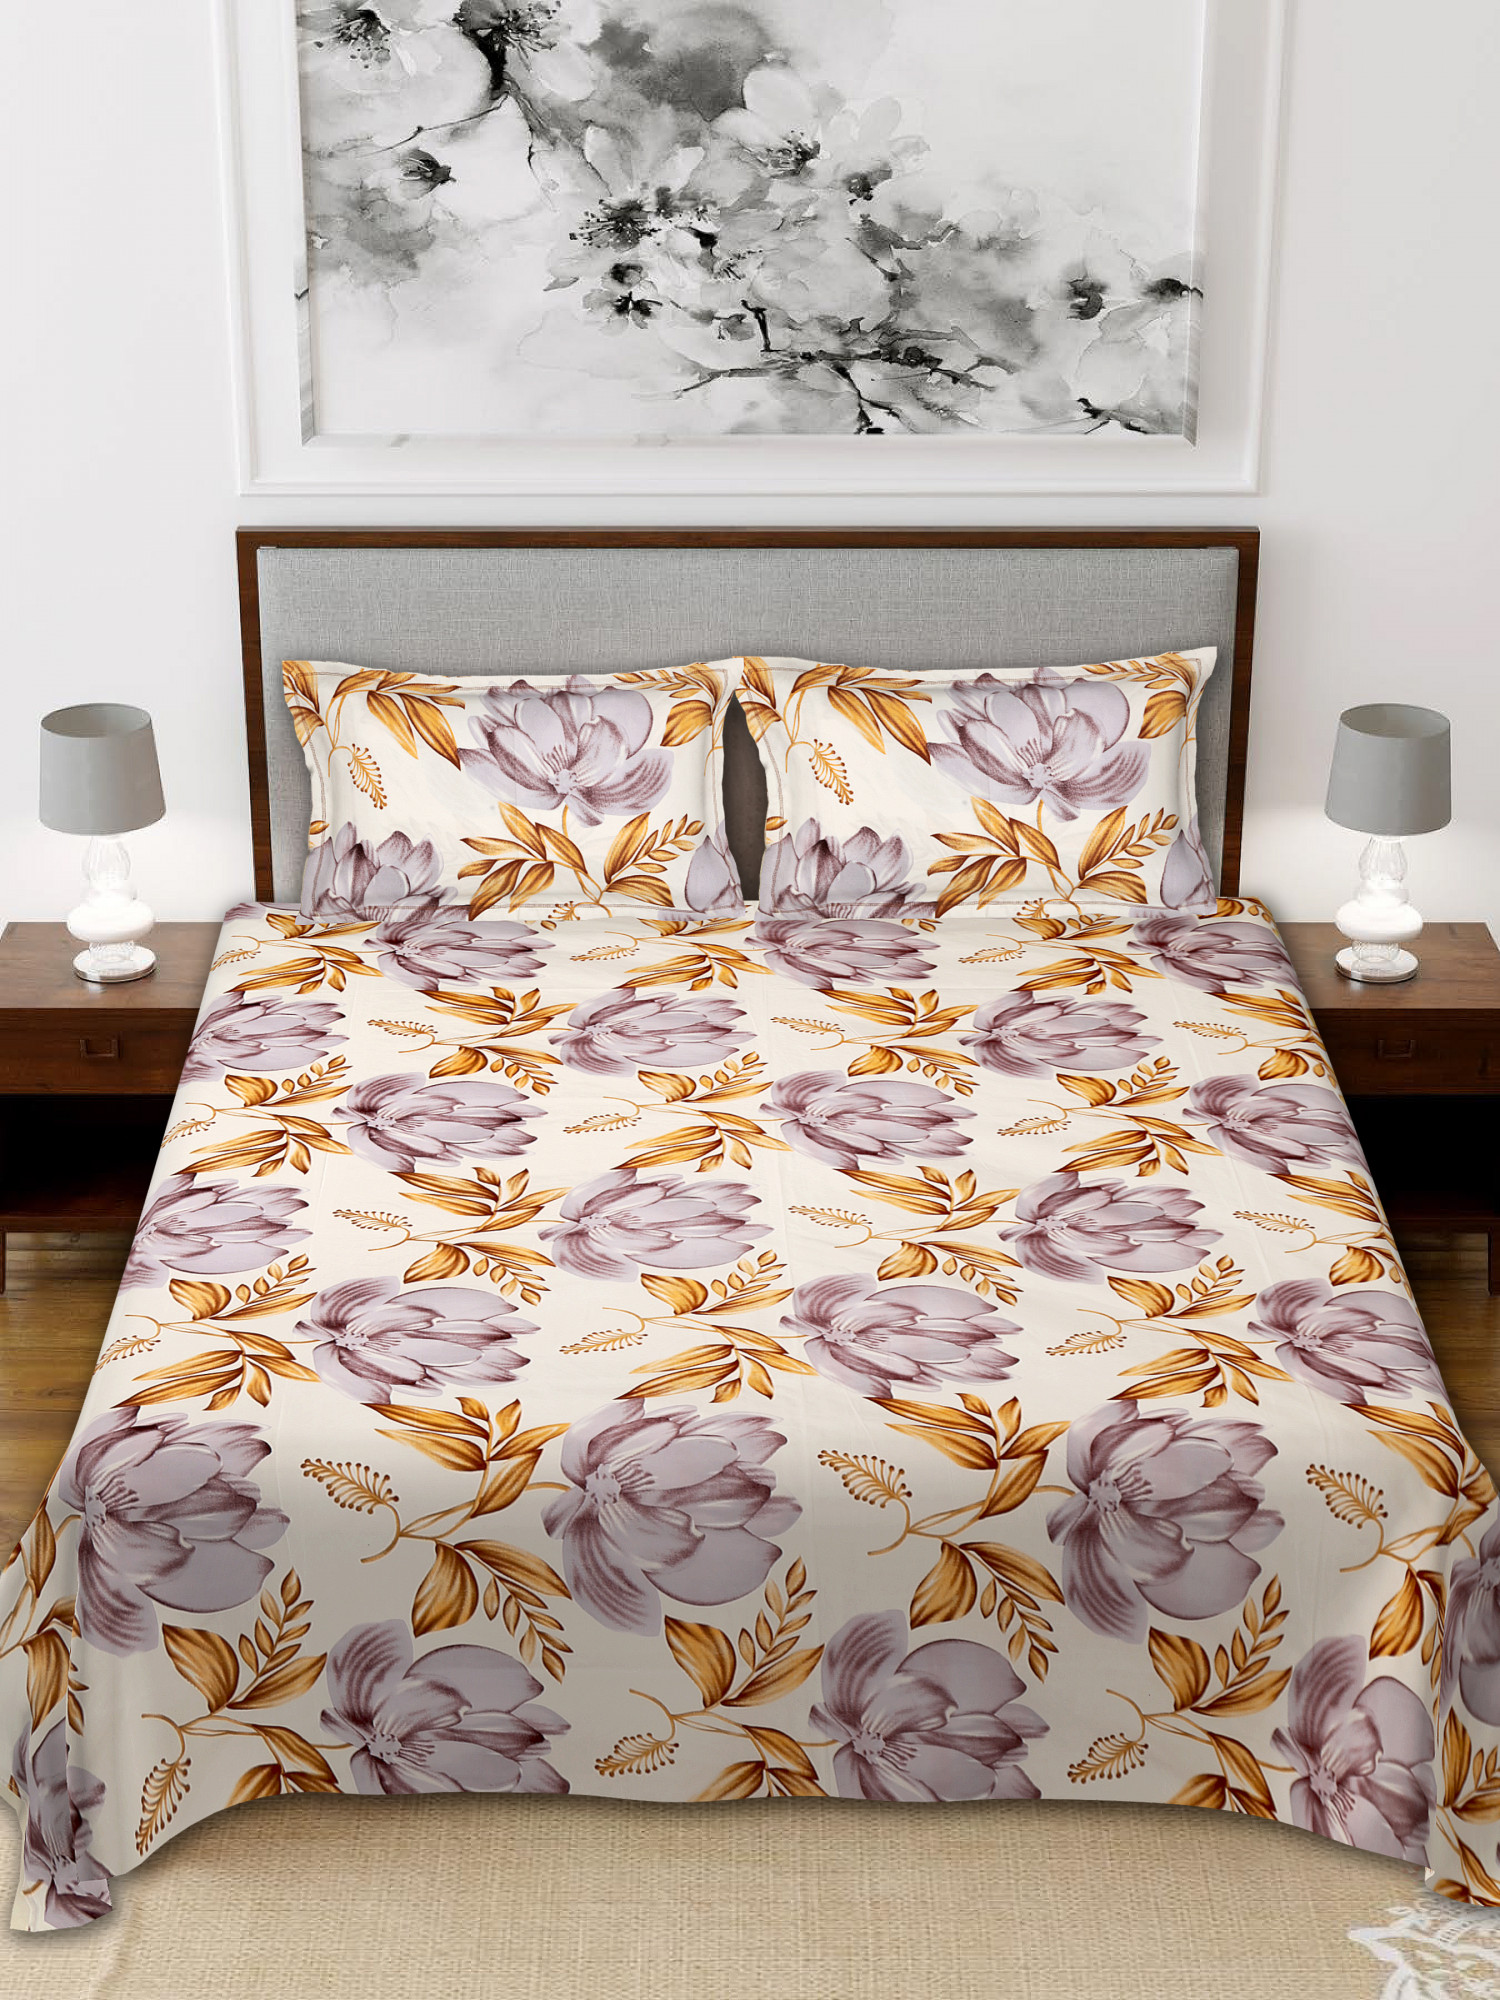 Kuber Industries Flower Print Glace Cotton 144 TC King Size Double Bedsheet with 2 Pillow Covers (White)